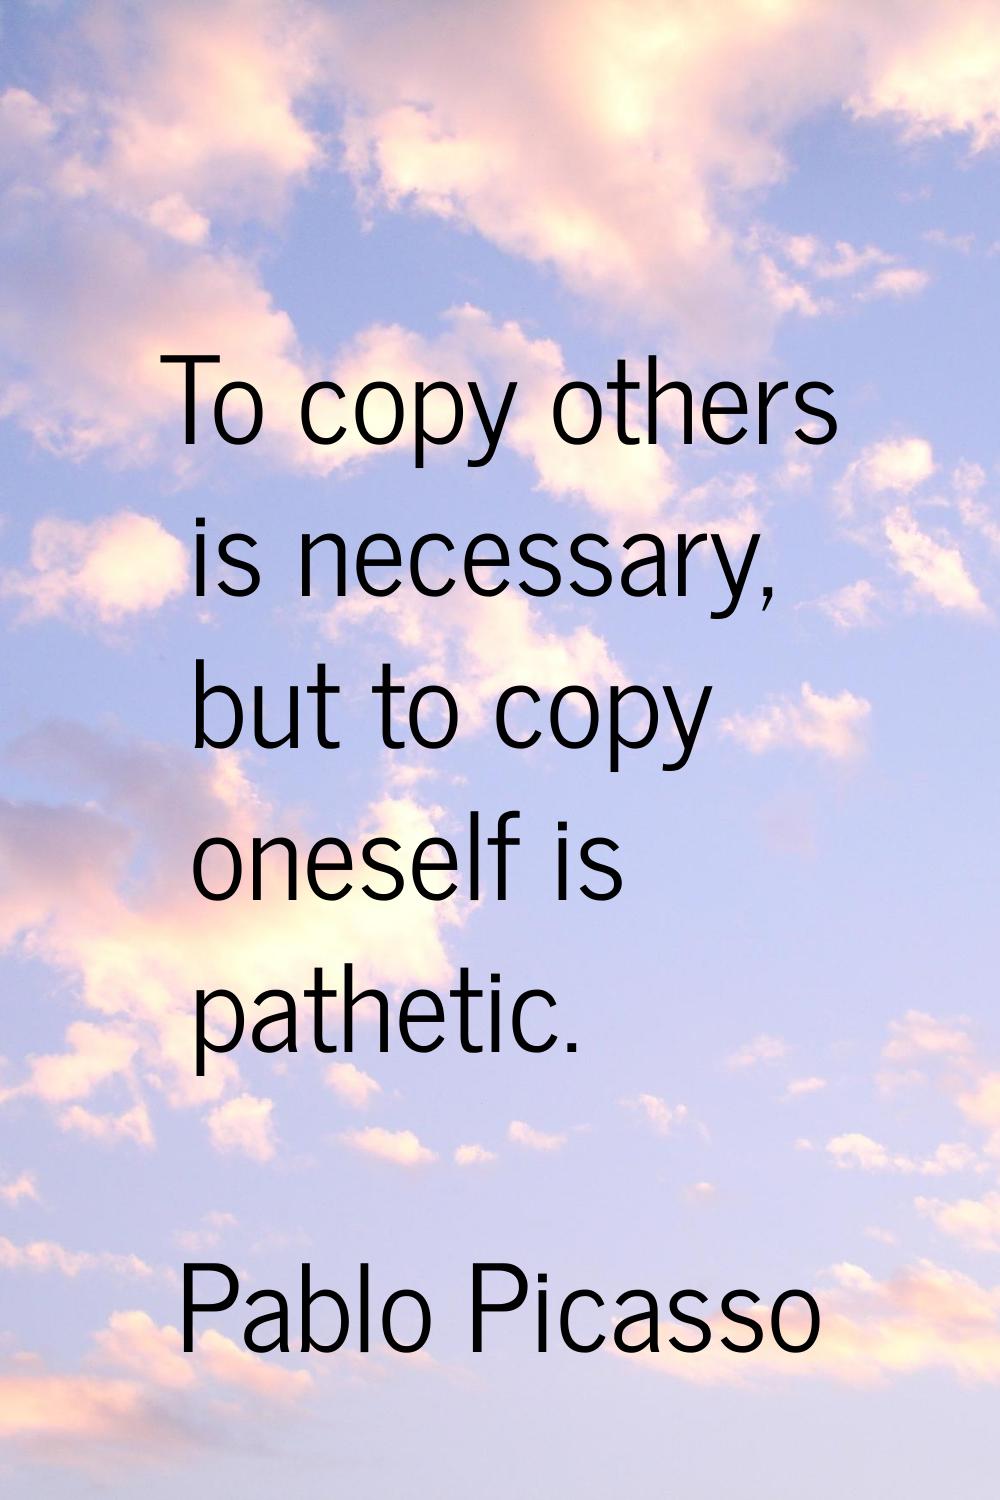 To copy others is necessary, but to copy oneself is pathetic.